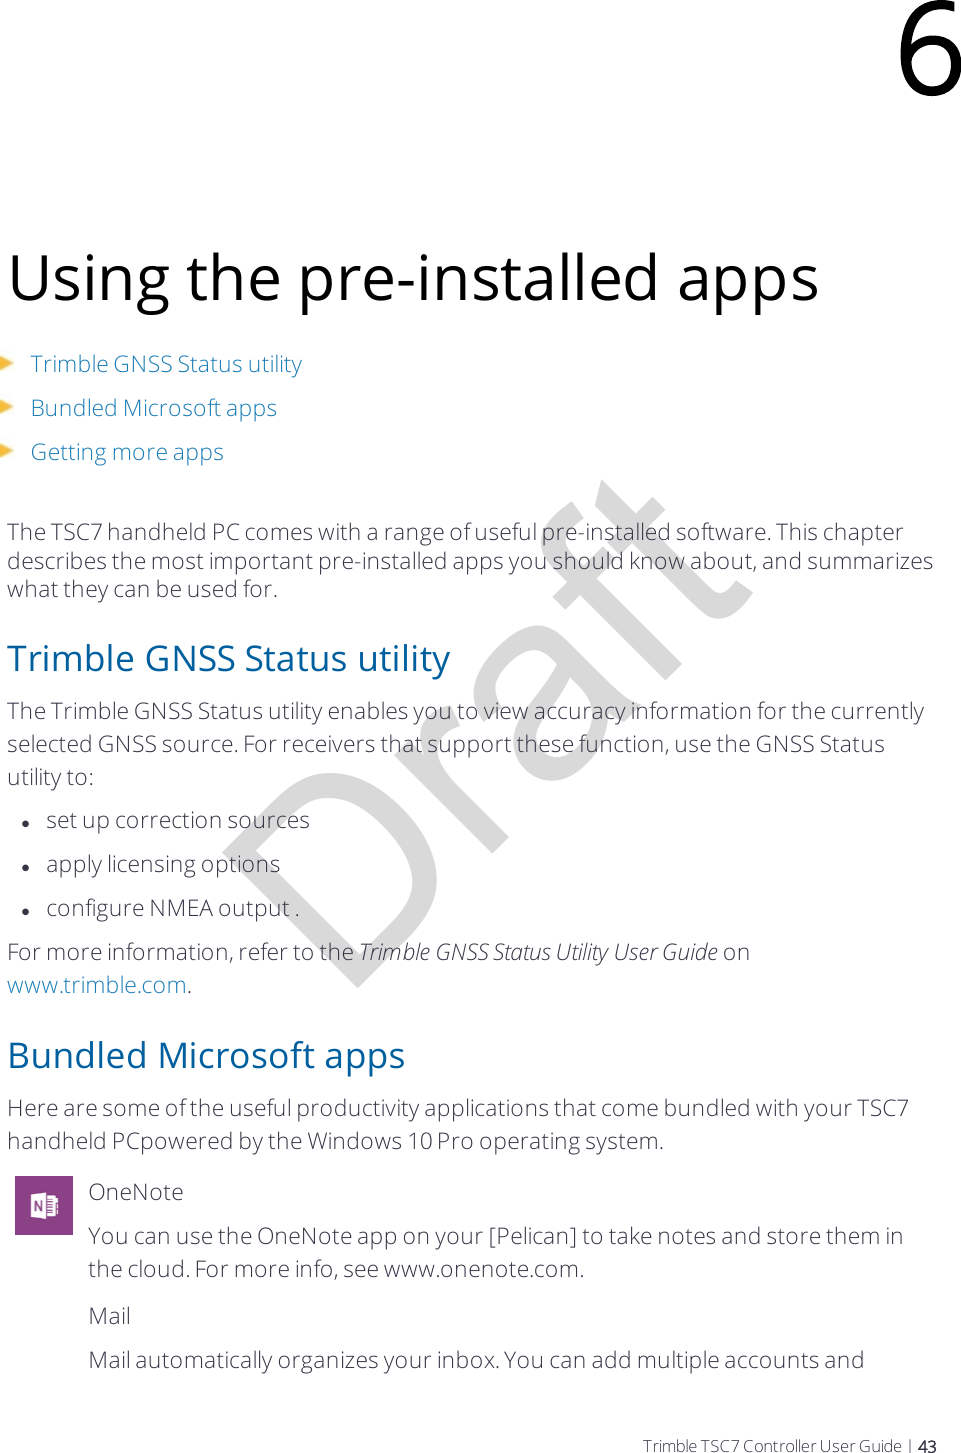 DraftUsing the pre-installed appsTrimble GNSS Status utilityBundled Microsoft appsGetting more appsThe TSC7 handheld PC comes with a range of useful pre-installed software. This chapter describes the most important pre-installed apps you should know about, and summarizes what they can be used for.Trimble GNSS Status utilityThe Trimble GNSS Status utility enables you to view accuracy information for the currently selected GNSS source. For  receivers that support these function, use the GNSSStatus utility to:lset up correction sourceslapply licensing optionslconfigure NMEA output .For more information, refer to the Trimble GNSSStatus Utility User Guide on www.trimble.com.Bundled Microsoft appsHere are some of the useful productivity applications that come bundled with your TSC7 handheld PCpowered by the Windows 10 Pro operating system.OneNoteYou can use the OneNote app on your [Pelican] to take notes and store them in the cloud. For more info, see www.onenote.com.MailMail automatically organizes your inbox. You can add multiple accounts and 6Trimble TSC7 Controller User Guide | 43